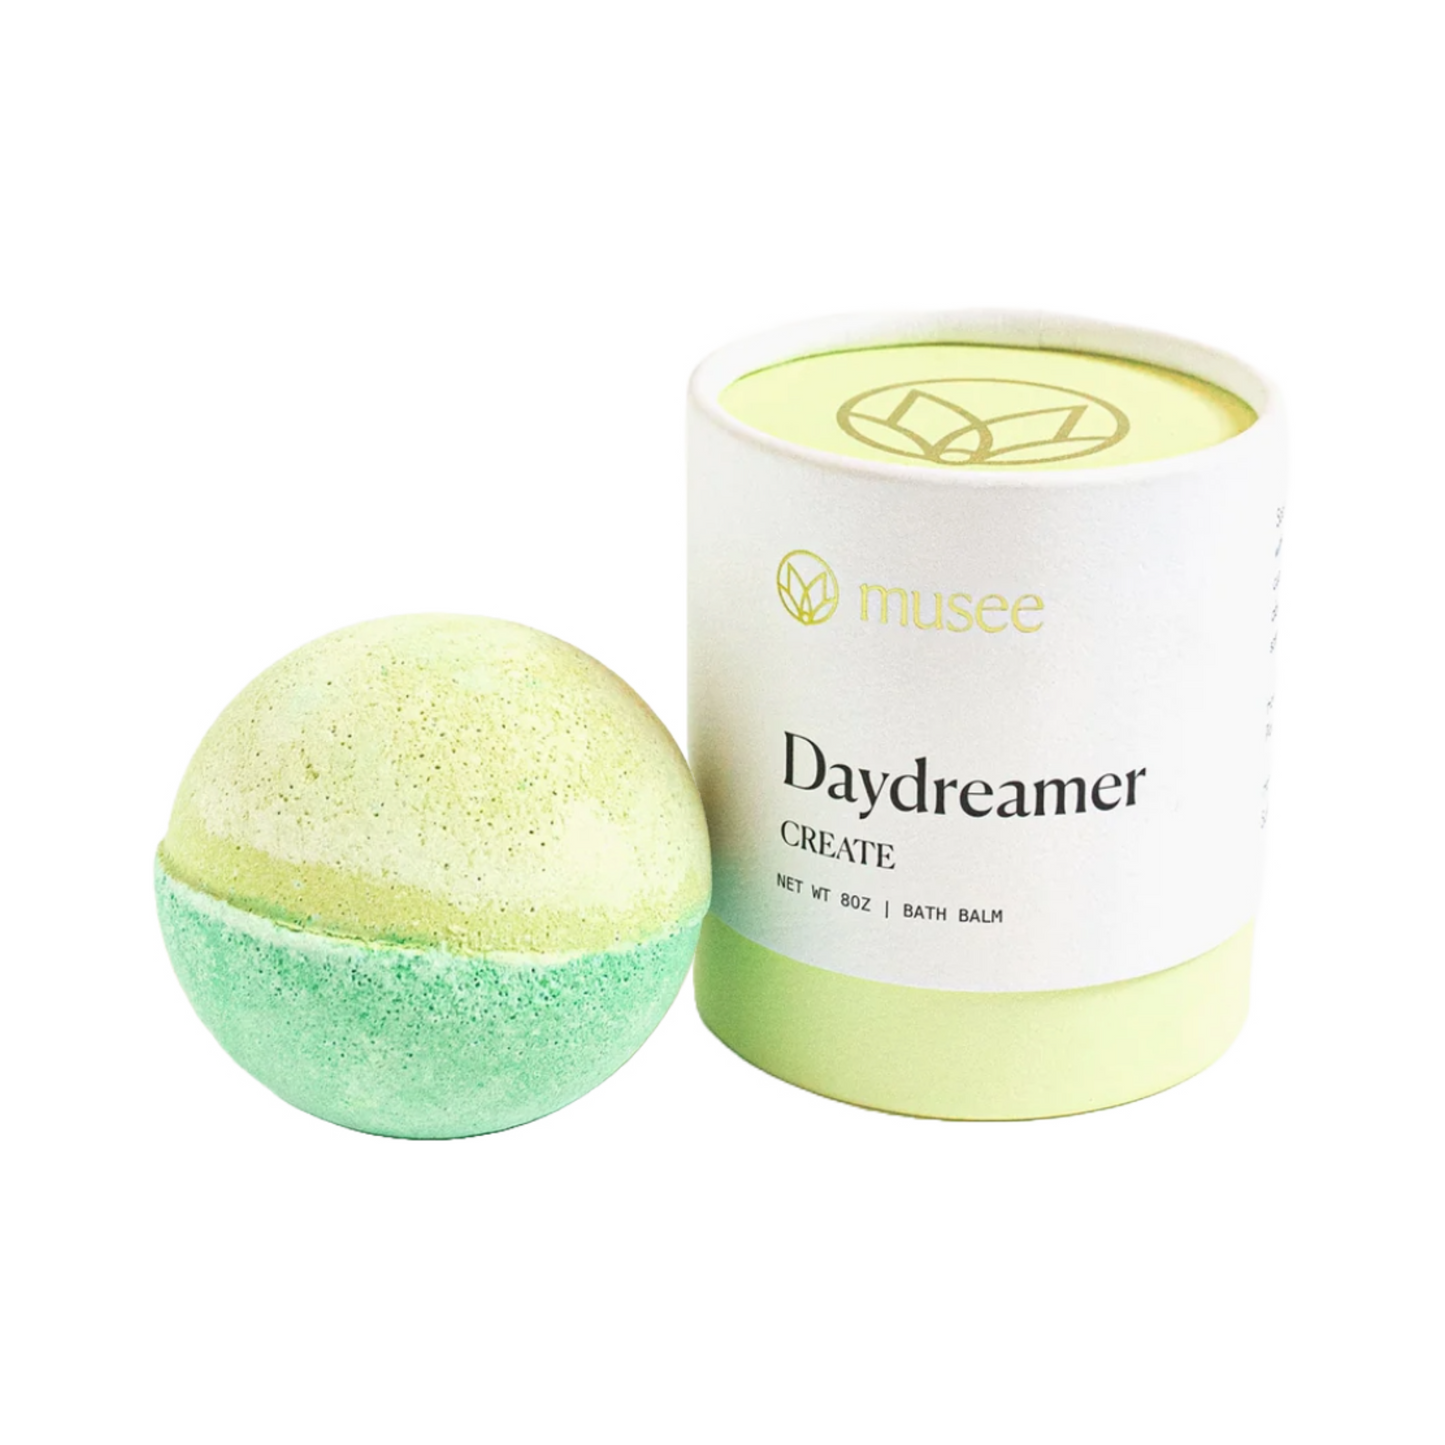 Load image into Gallery viewer, Daydreamer Bath Balm by Musee
